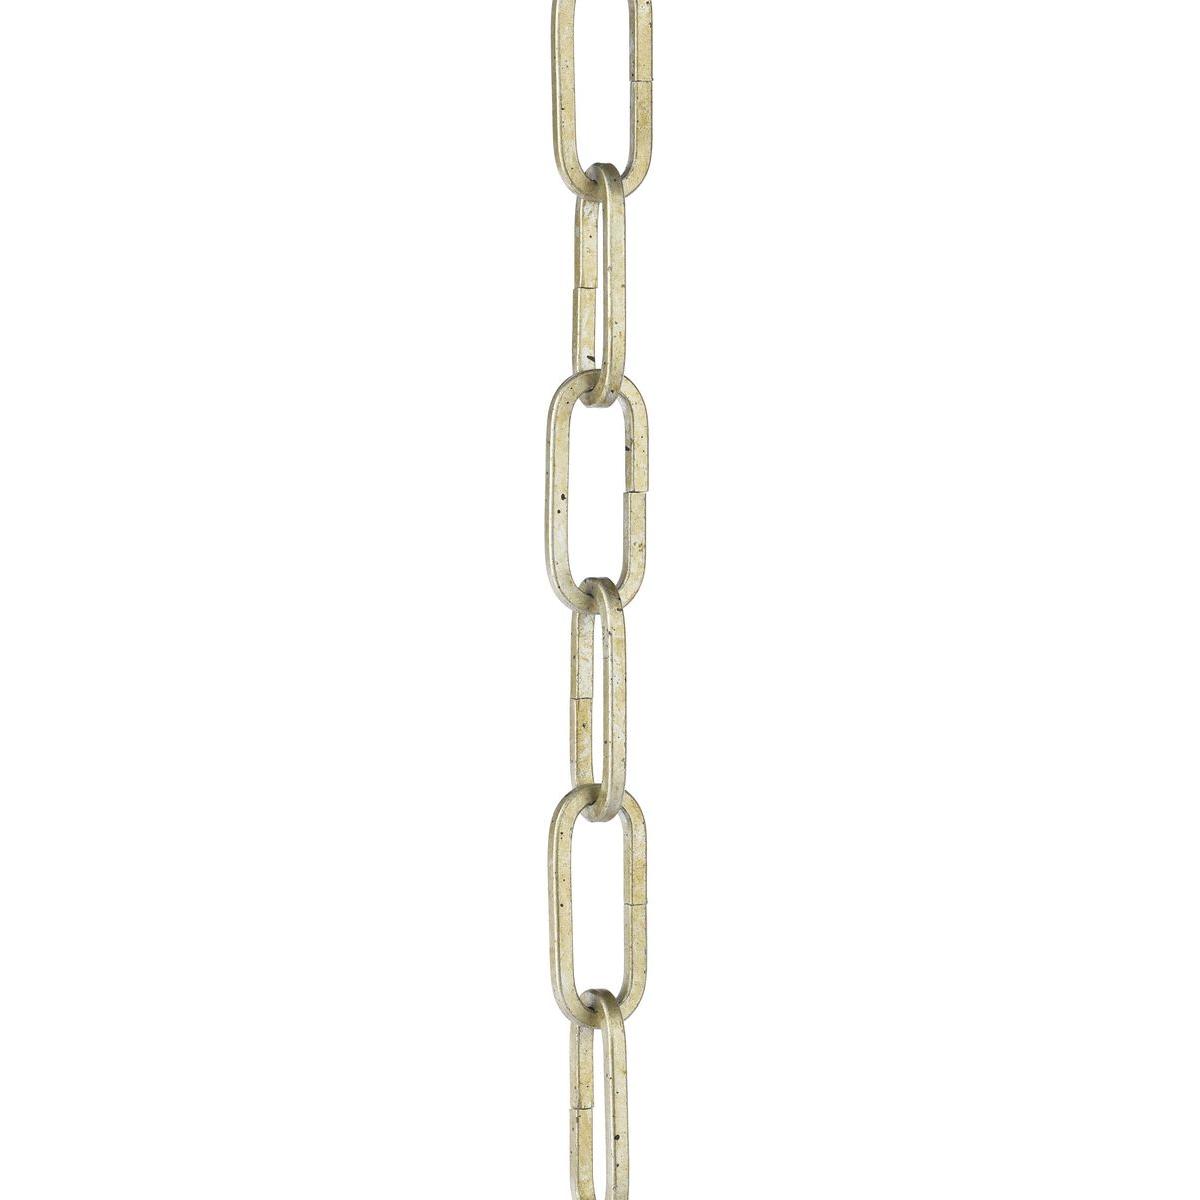 Accessory Chain - 4' of 9-Gauge Square Chain